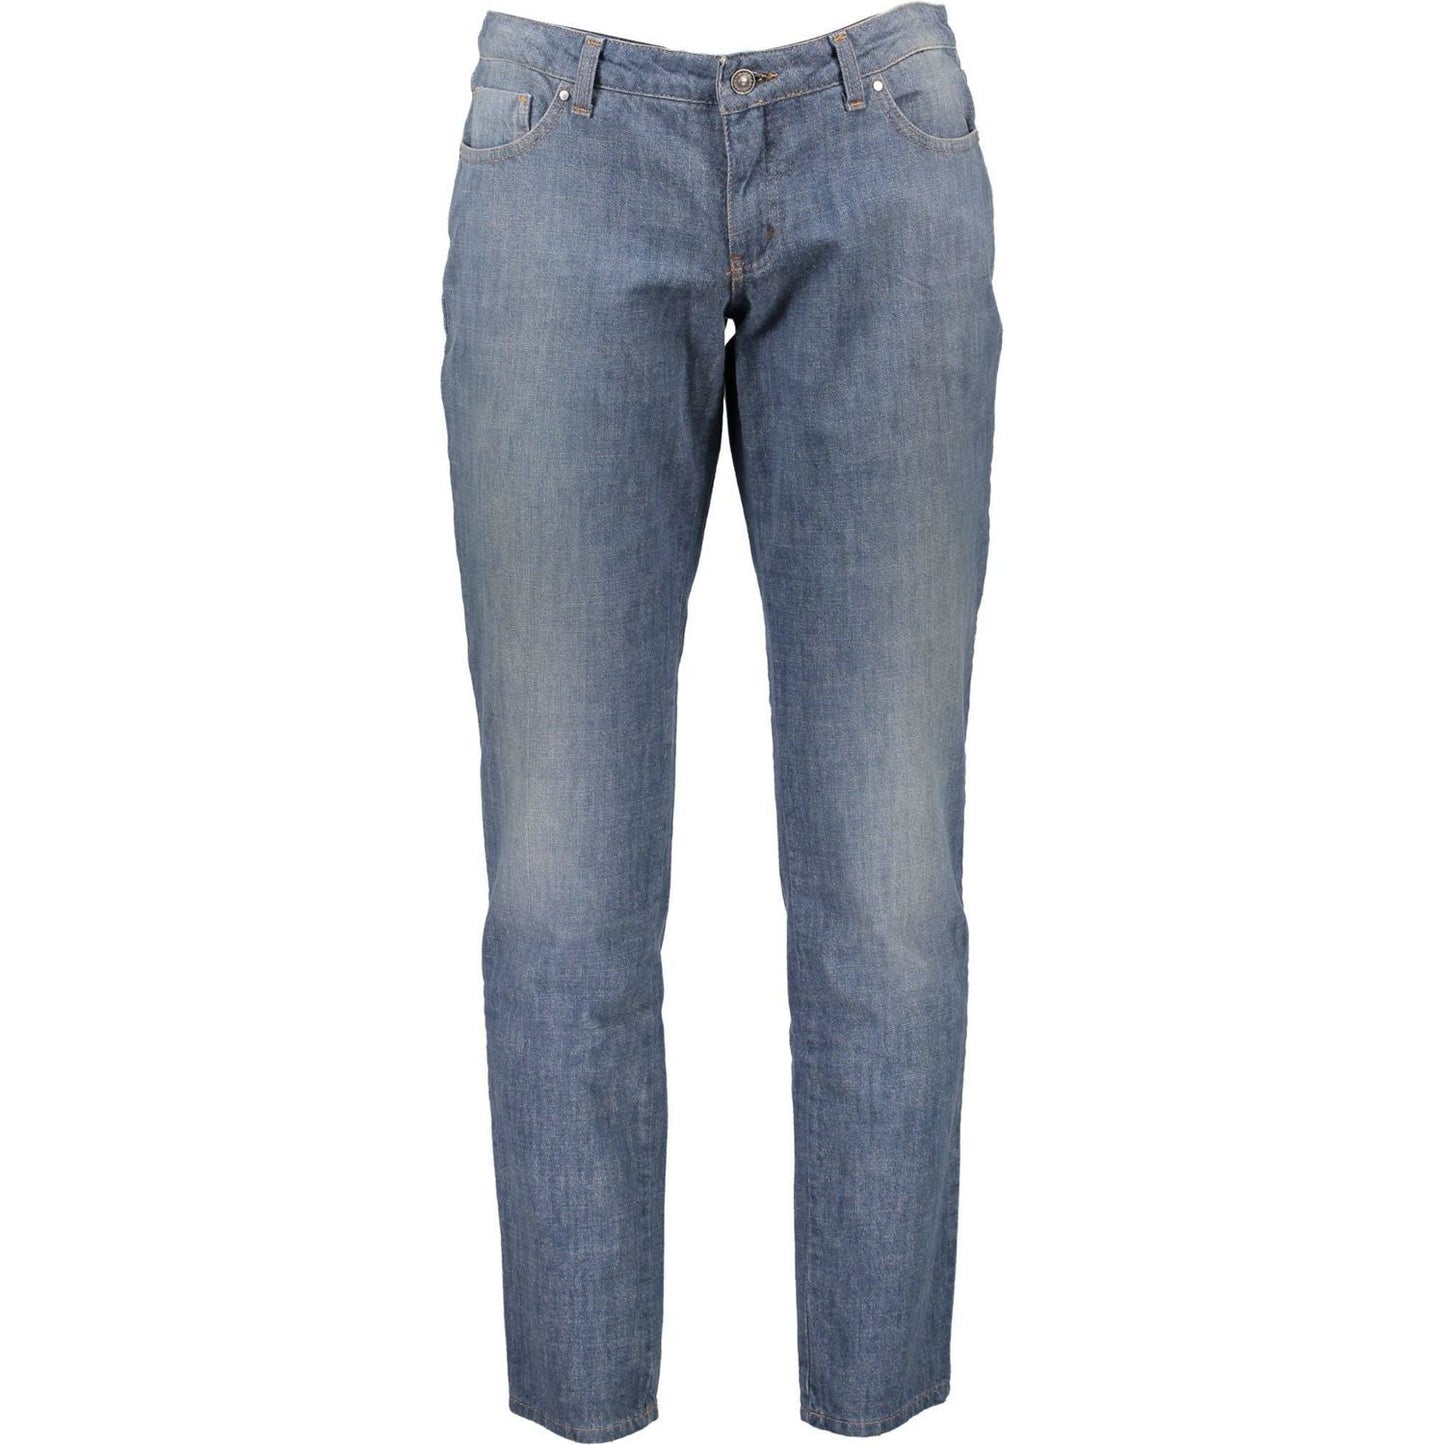 Costume National Chic Faded Blue Denim Jeans chic-faded-blue-denim-jeans